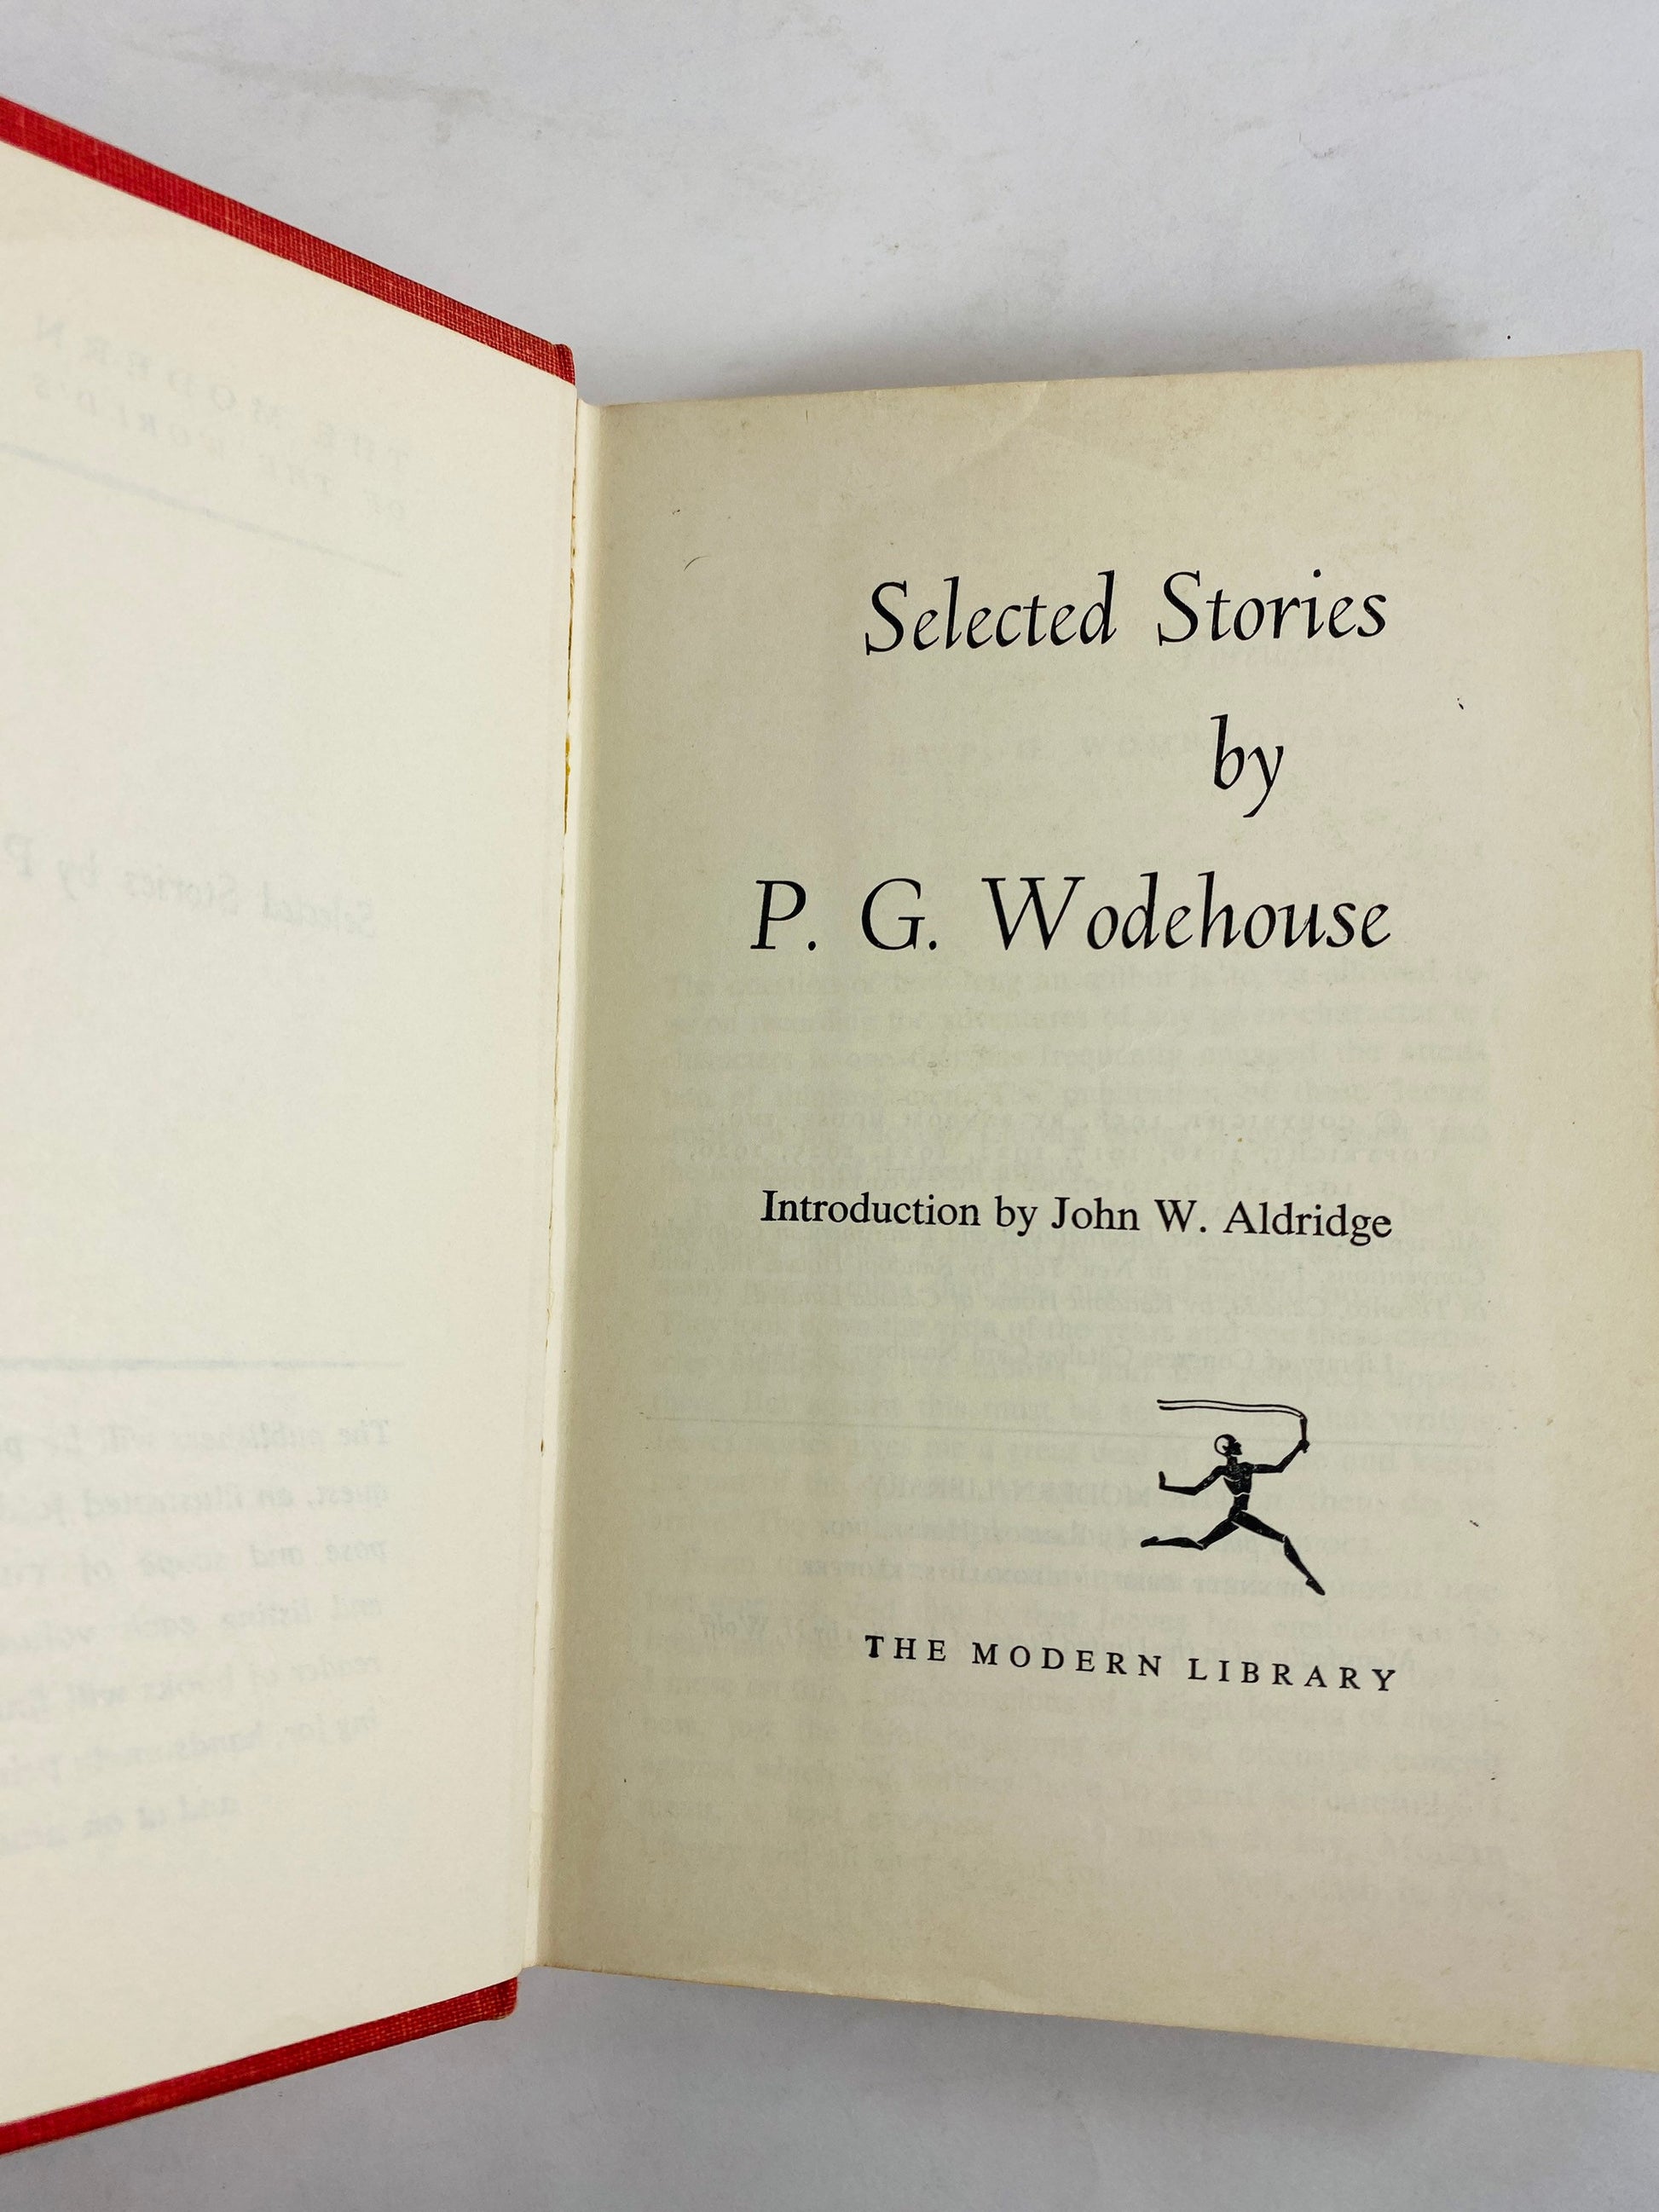 PG Wodehouse short stories which served as basis for a series of Broadway musical comedies Vintage Modern Library Book circa 1948